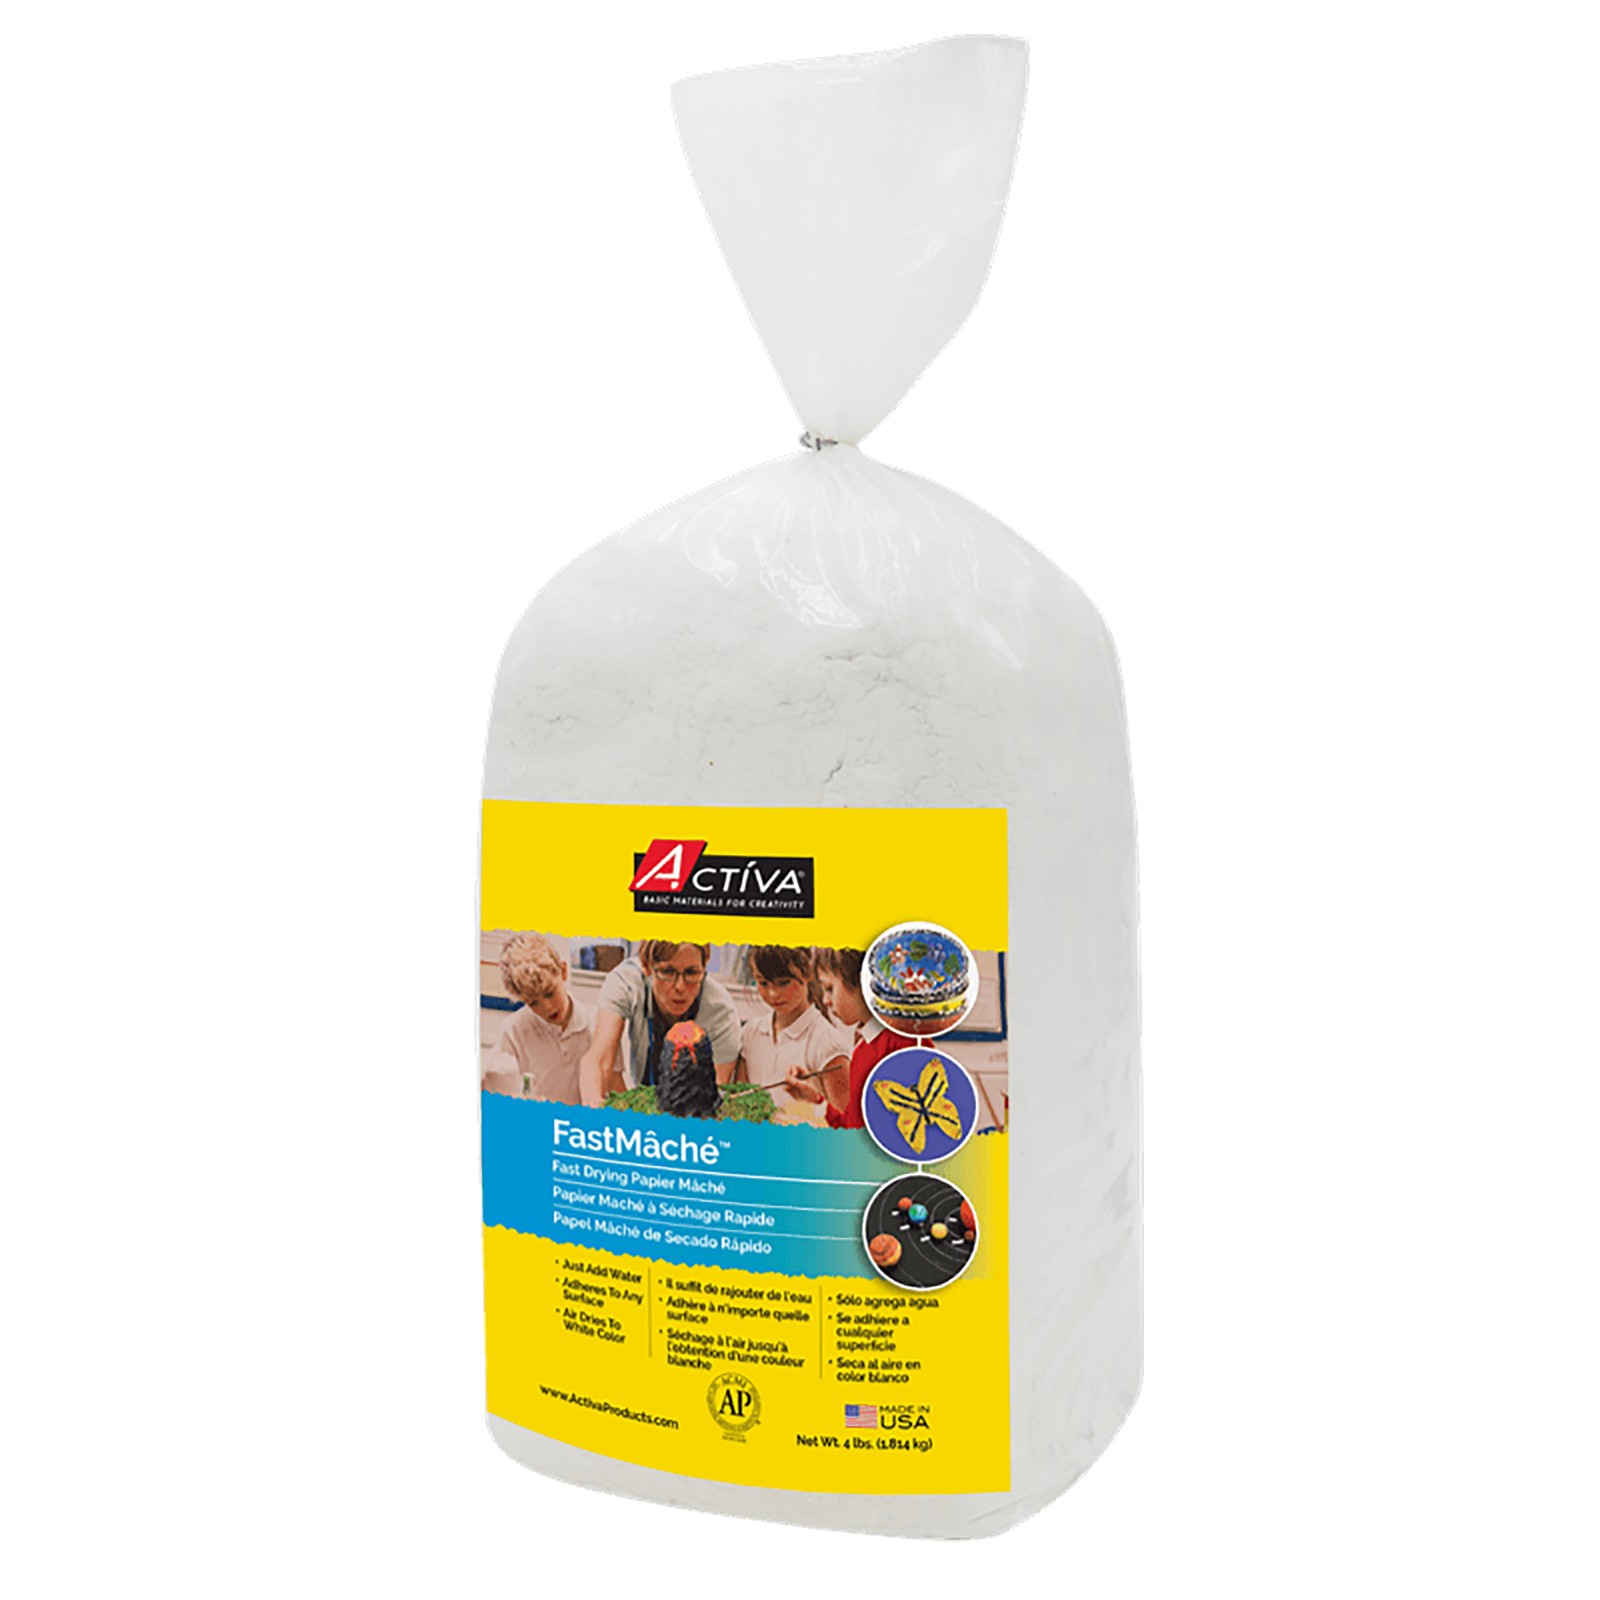 FastMchE Fast Drying Papier MchE, 4 lbs